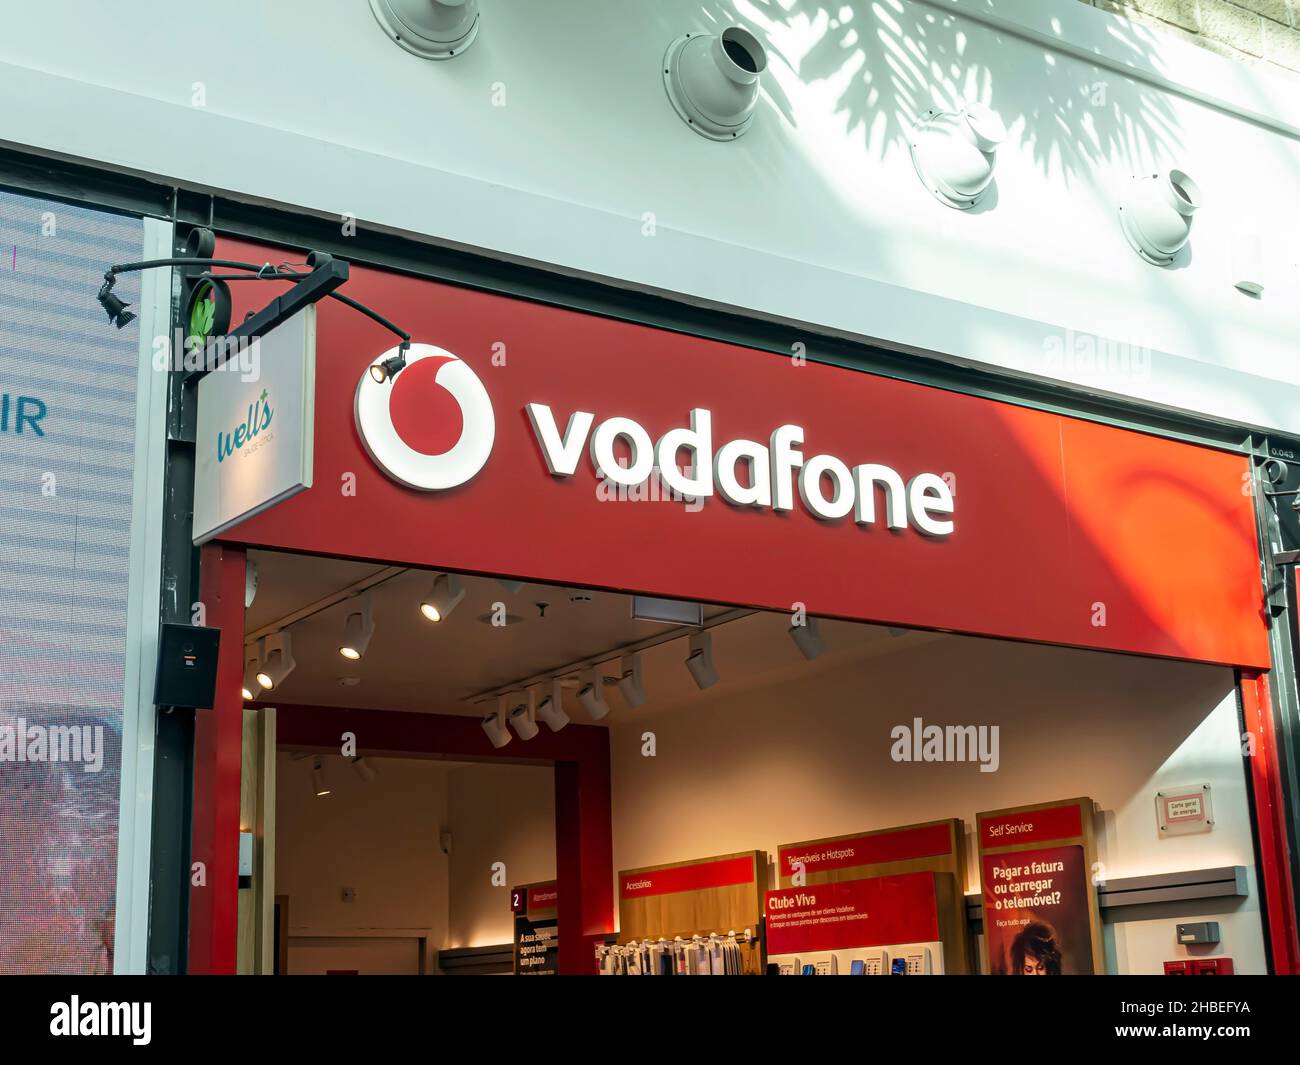 Funchal, Portugal - Oct 23, 2021: Vodafone store sign. Vodafone is a British multinational telecommunications company. Stock Photo